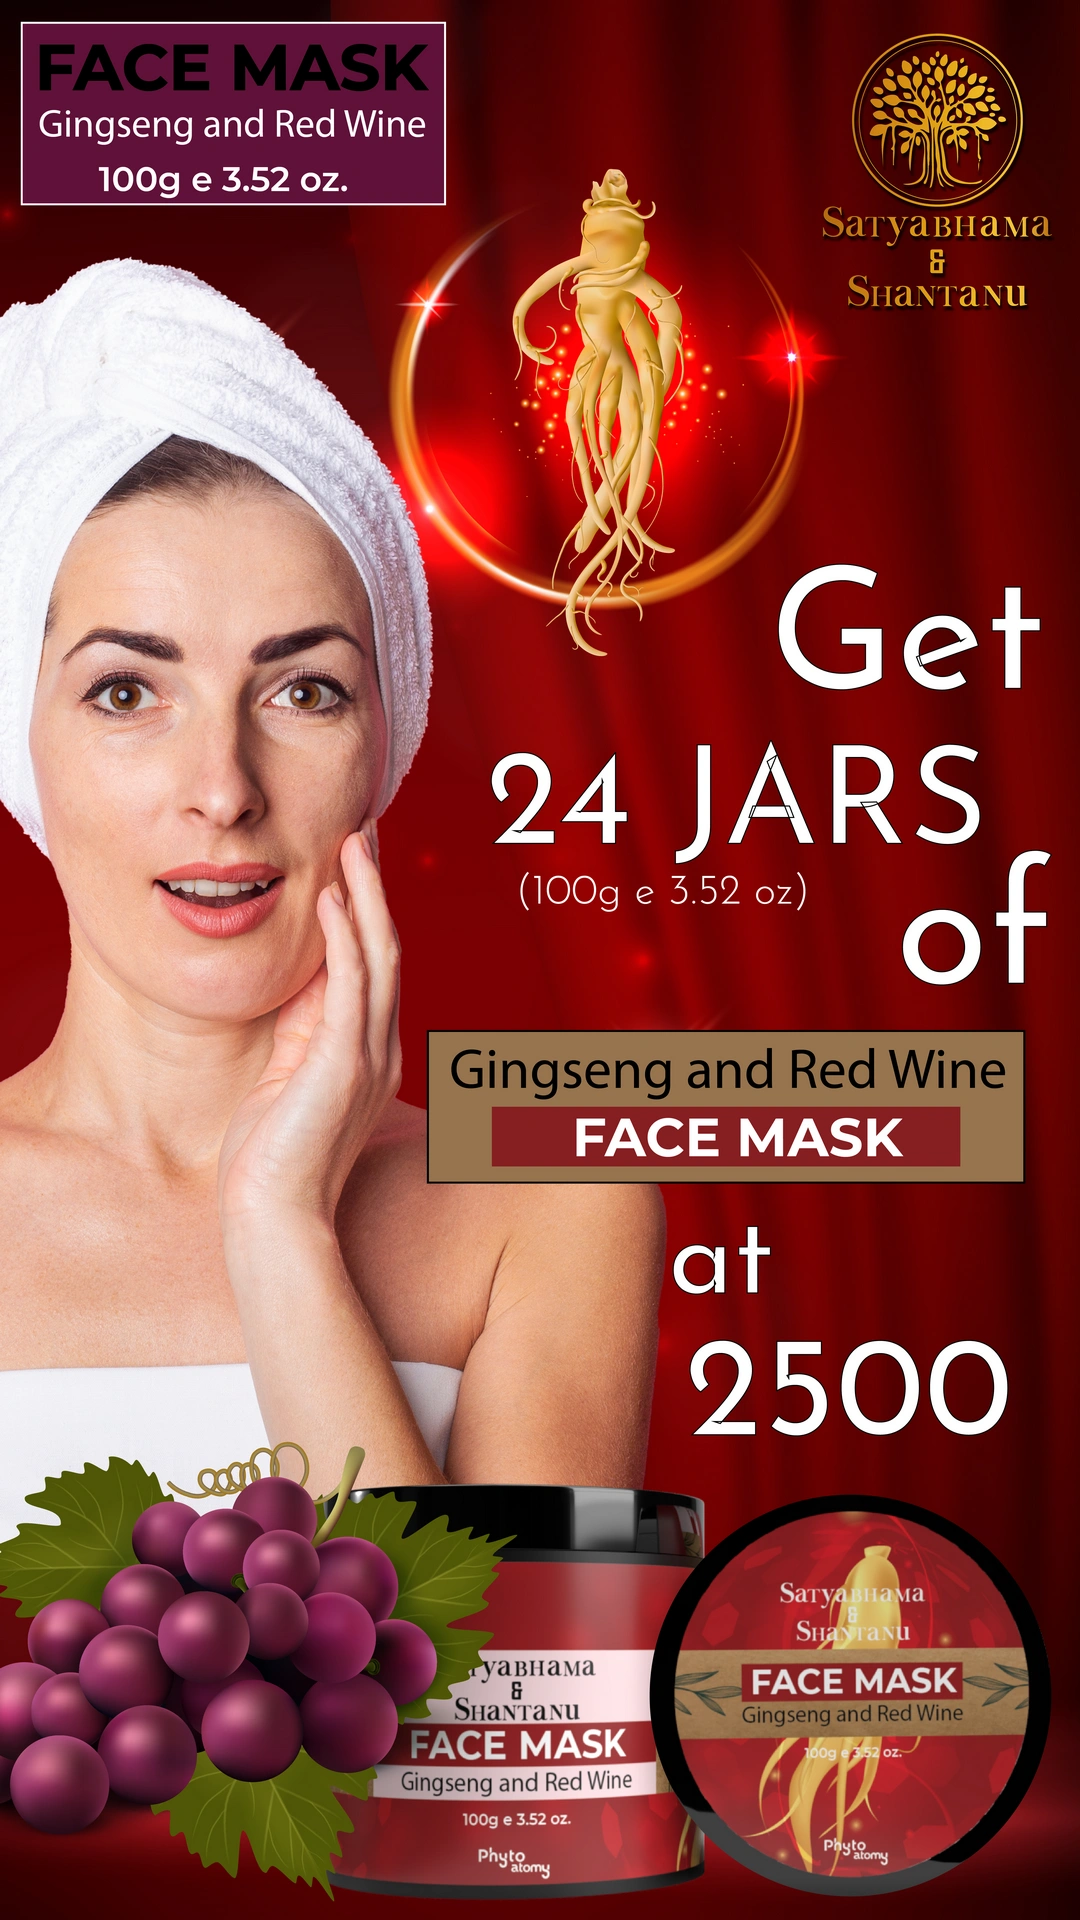 RBV B2B Gingseng and Red Wine Face Mask (100g)-24 Pcs.